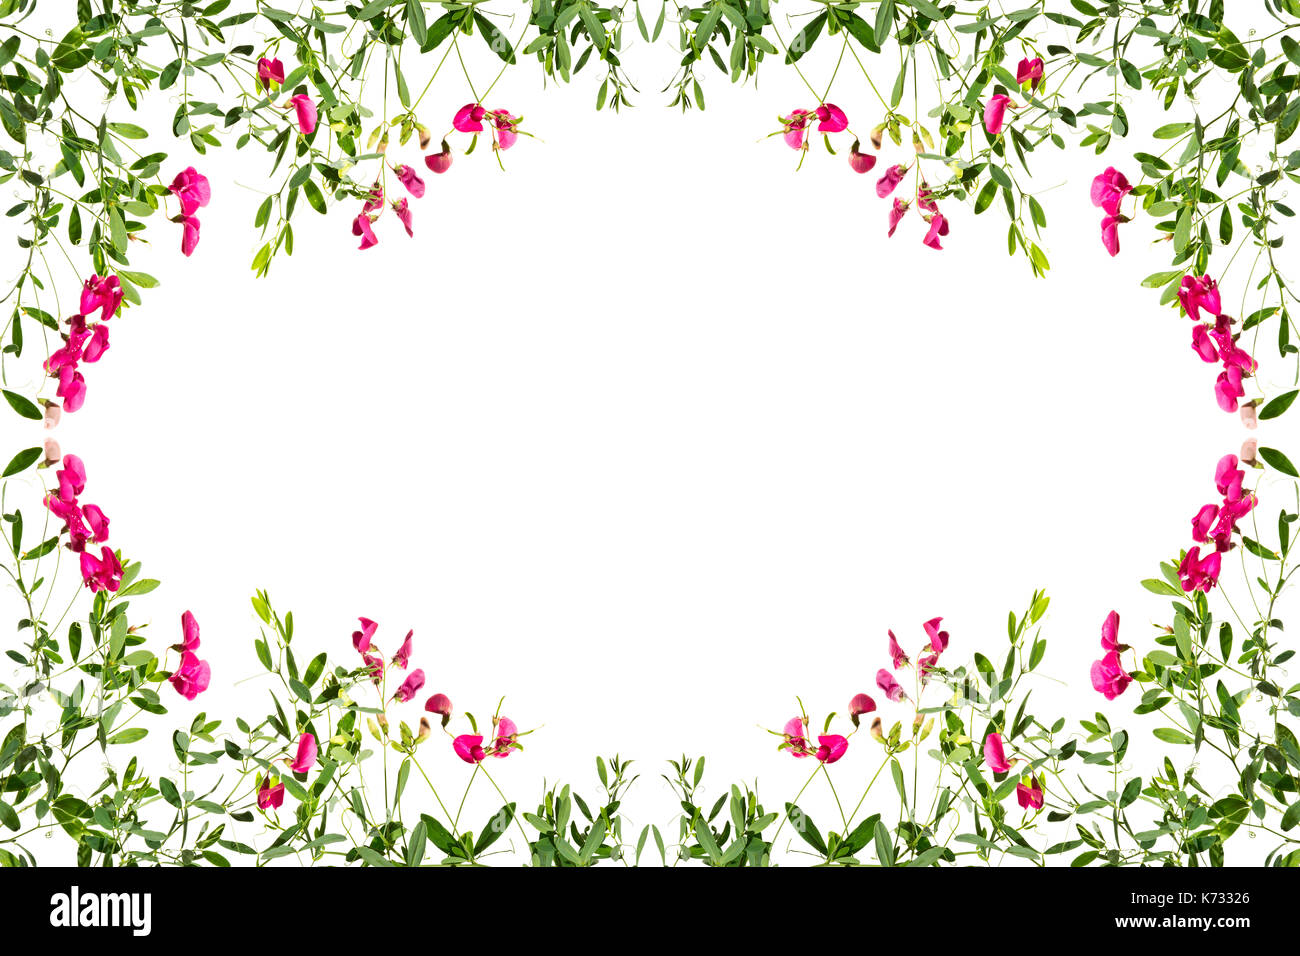 Frame with flowering pink pea shoots on a white background. Stock Photo